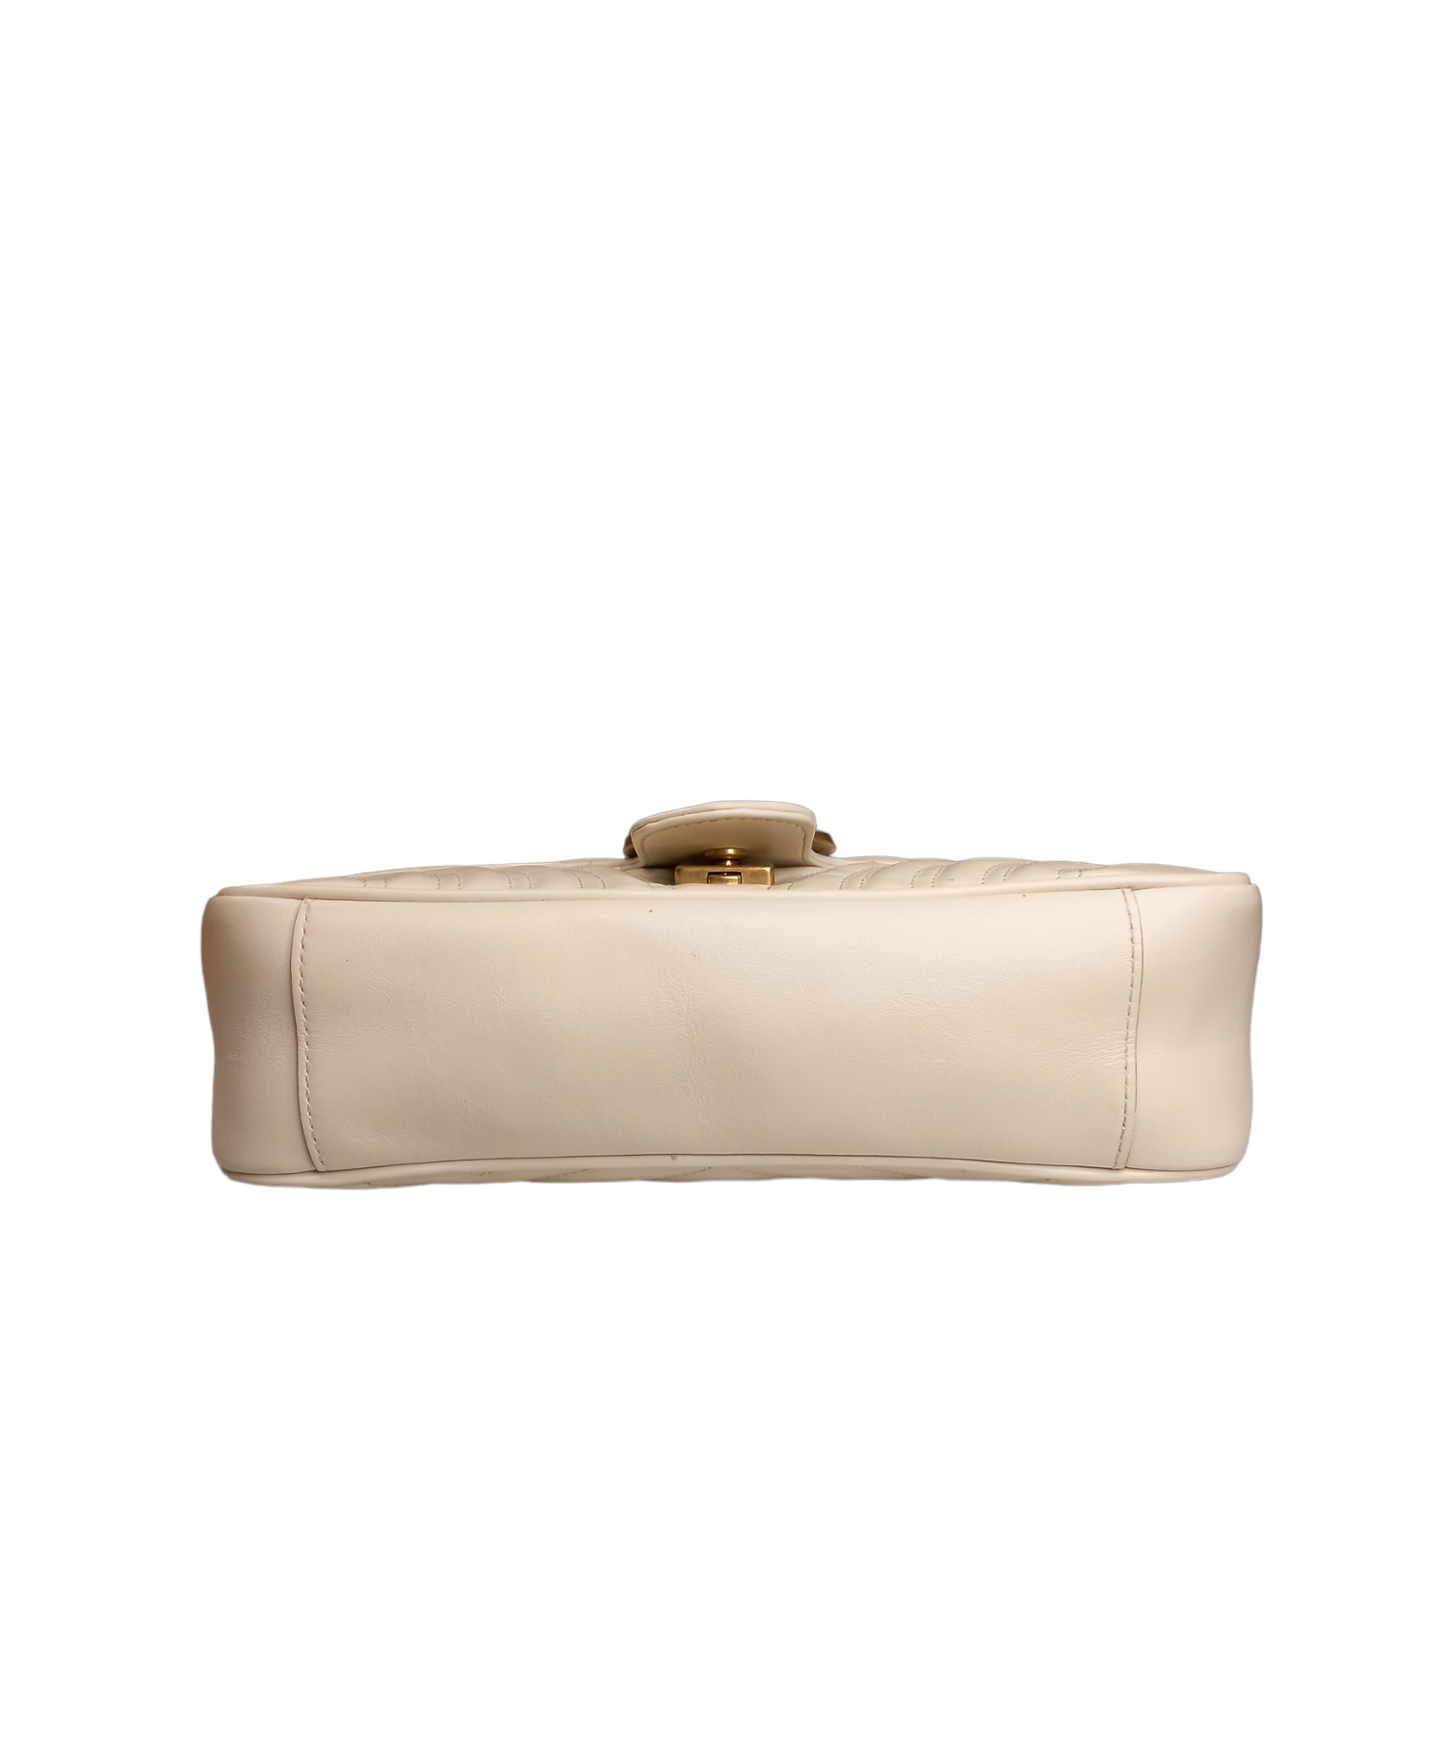 Gucci Leather Marmont Matelasse Small Shoulder Bag White